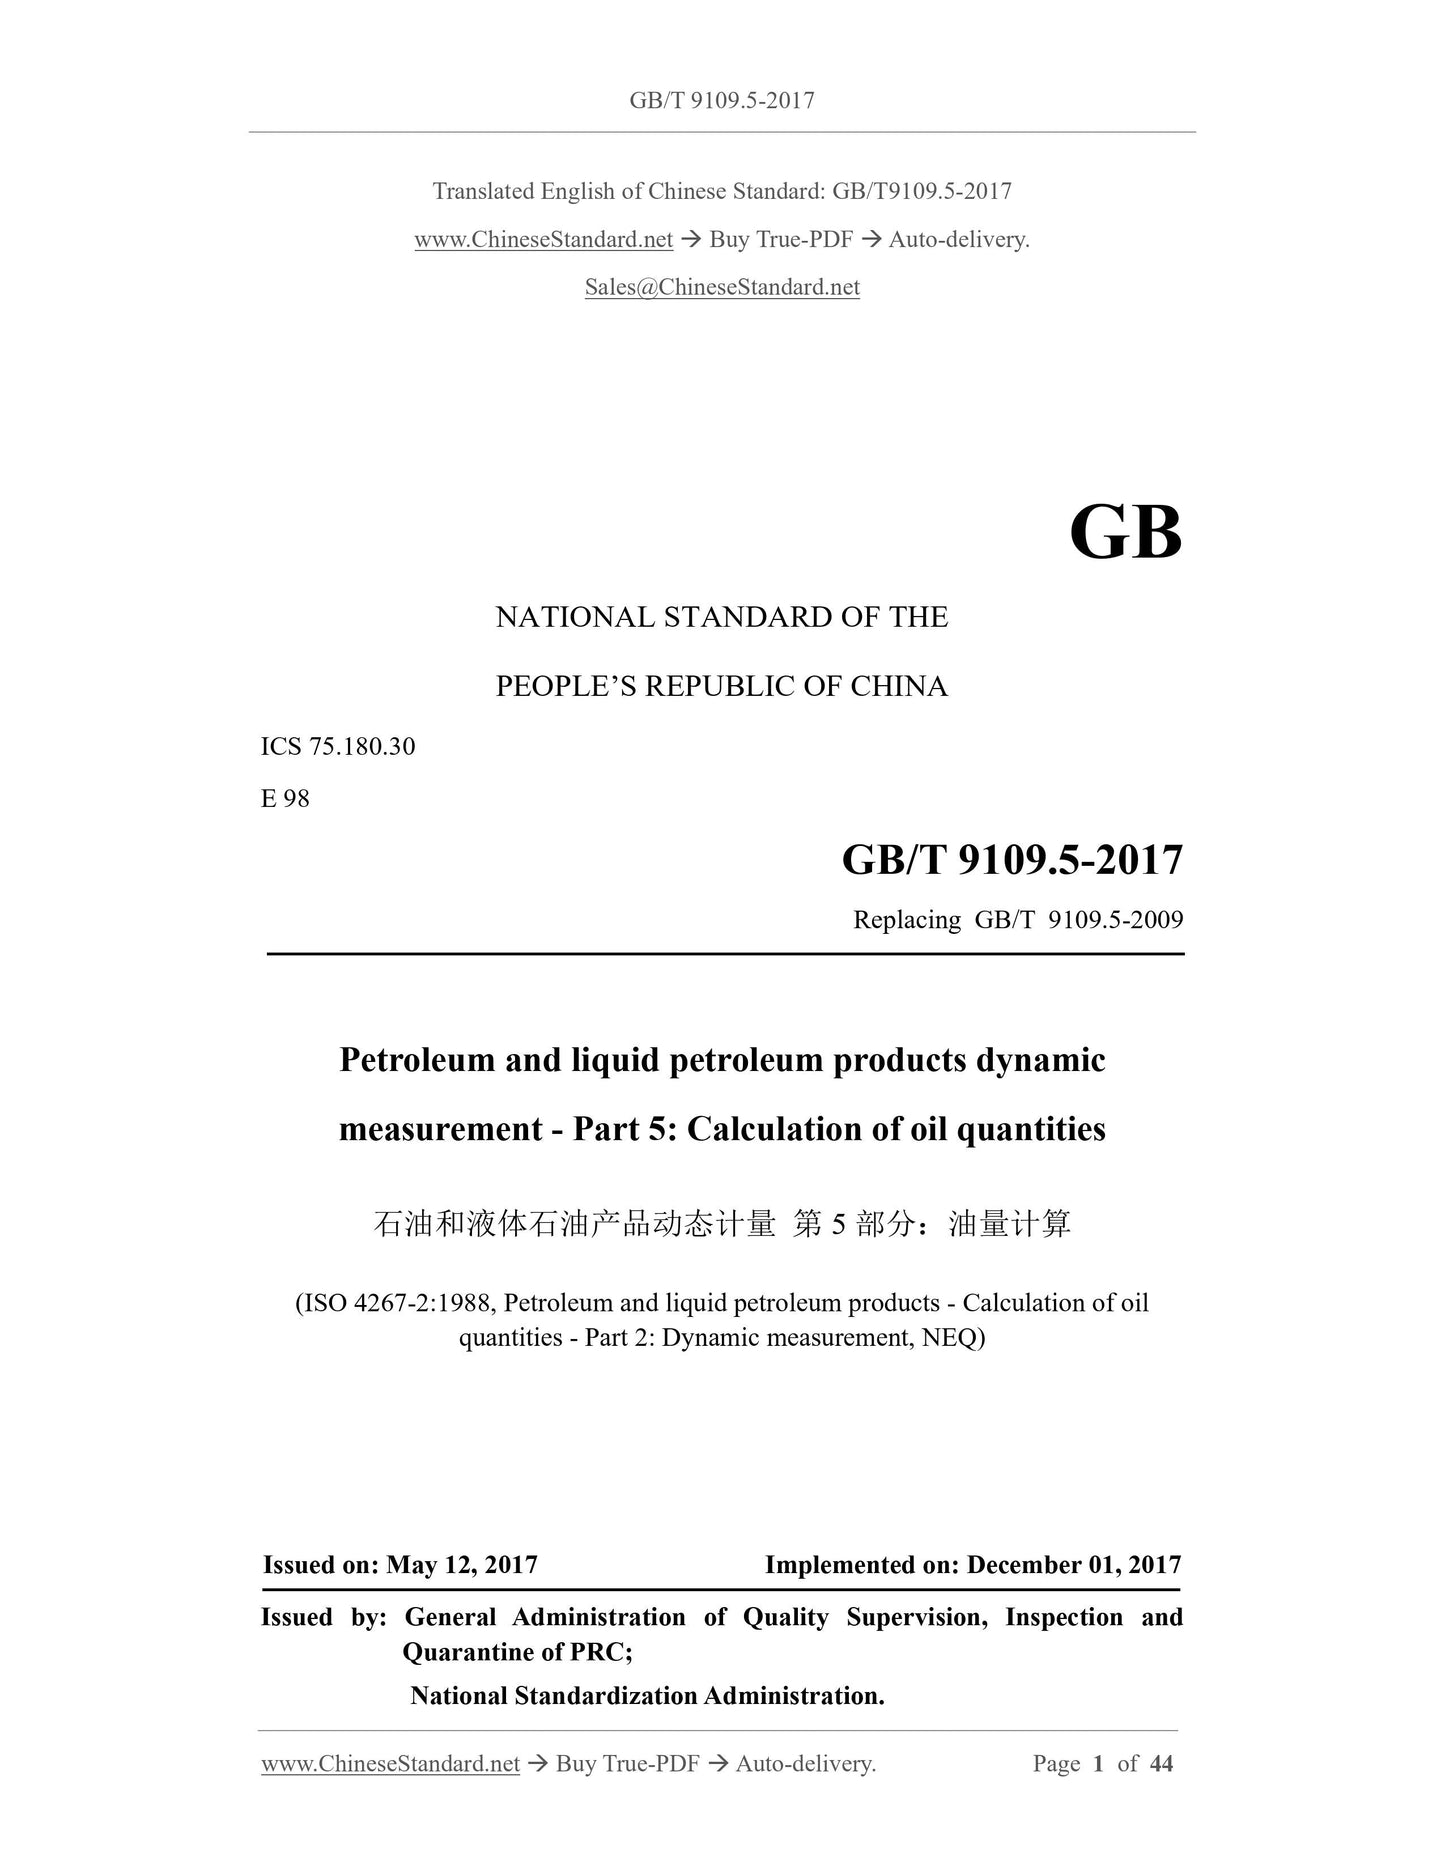 GB/T 9109.5-2017 Page 1